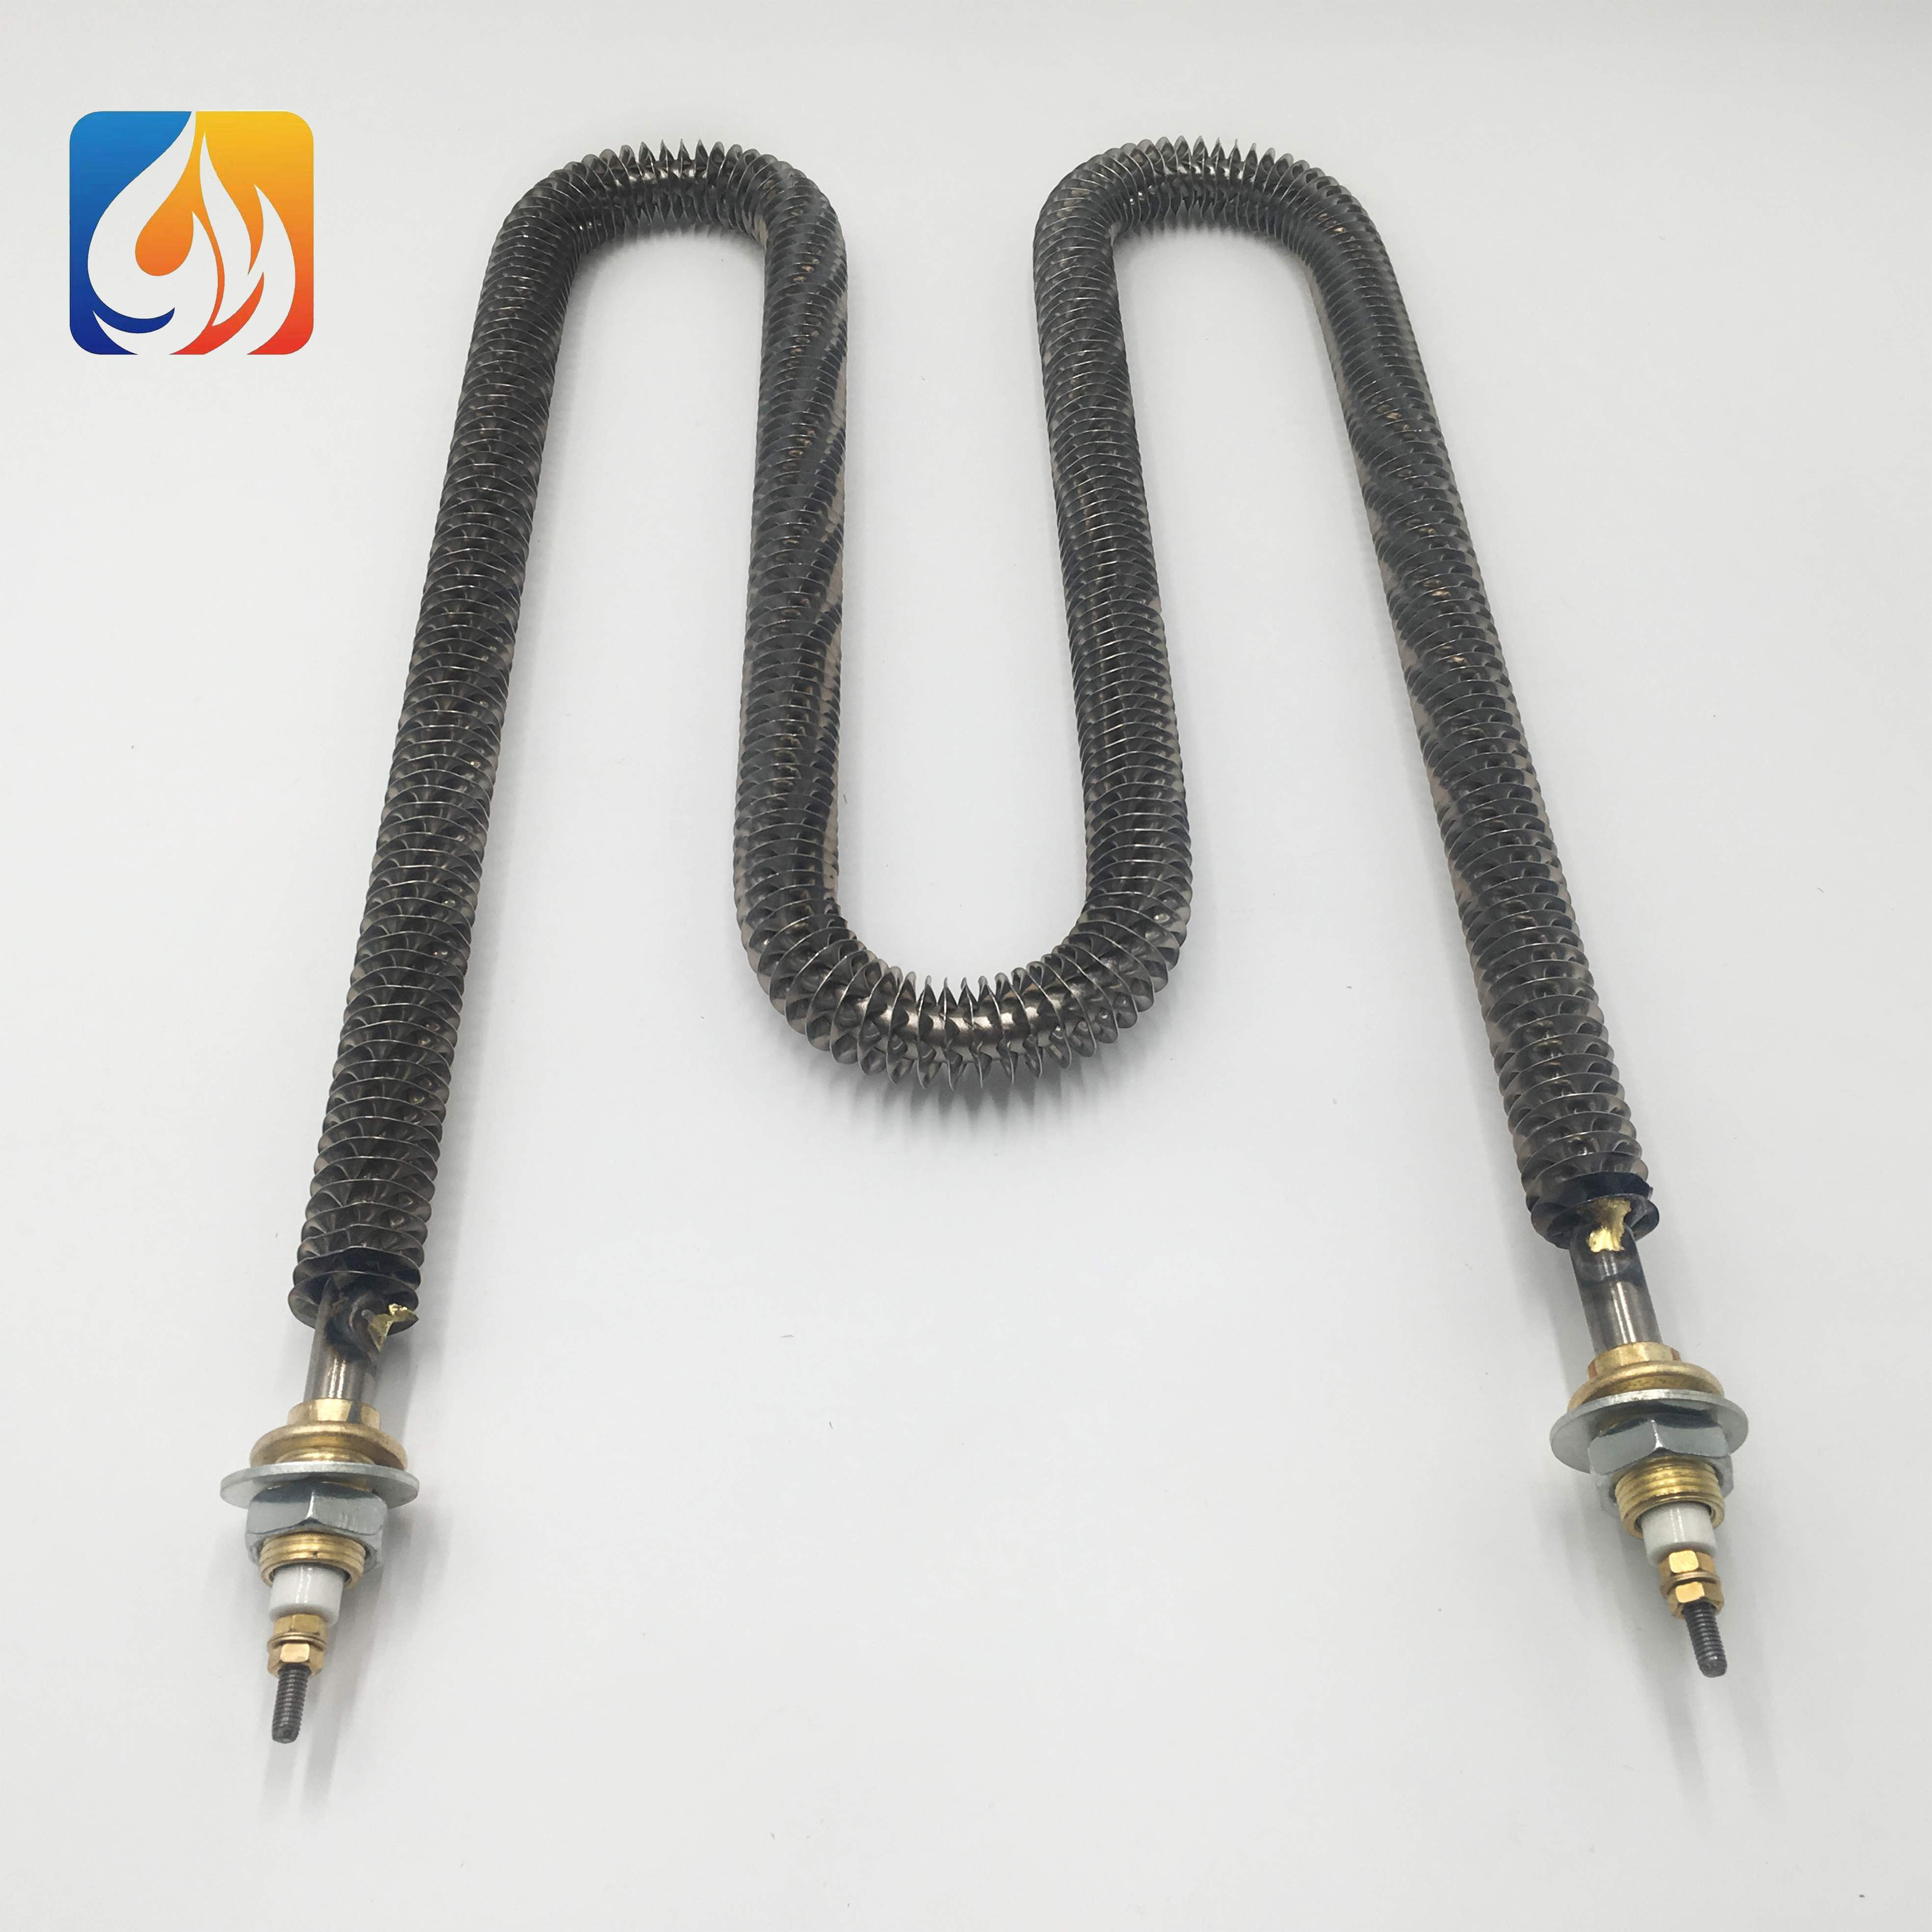 W shape air finned heating element with fins Featured Image